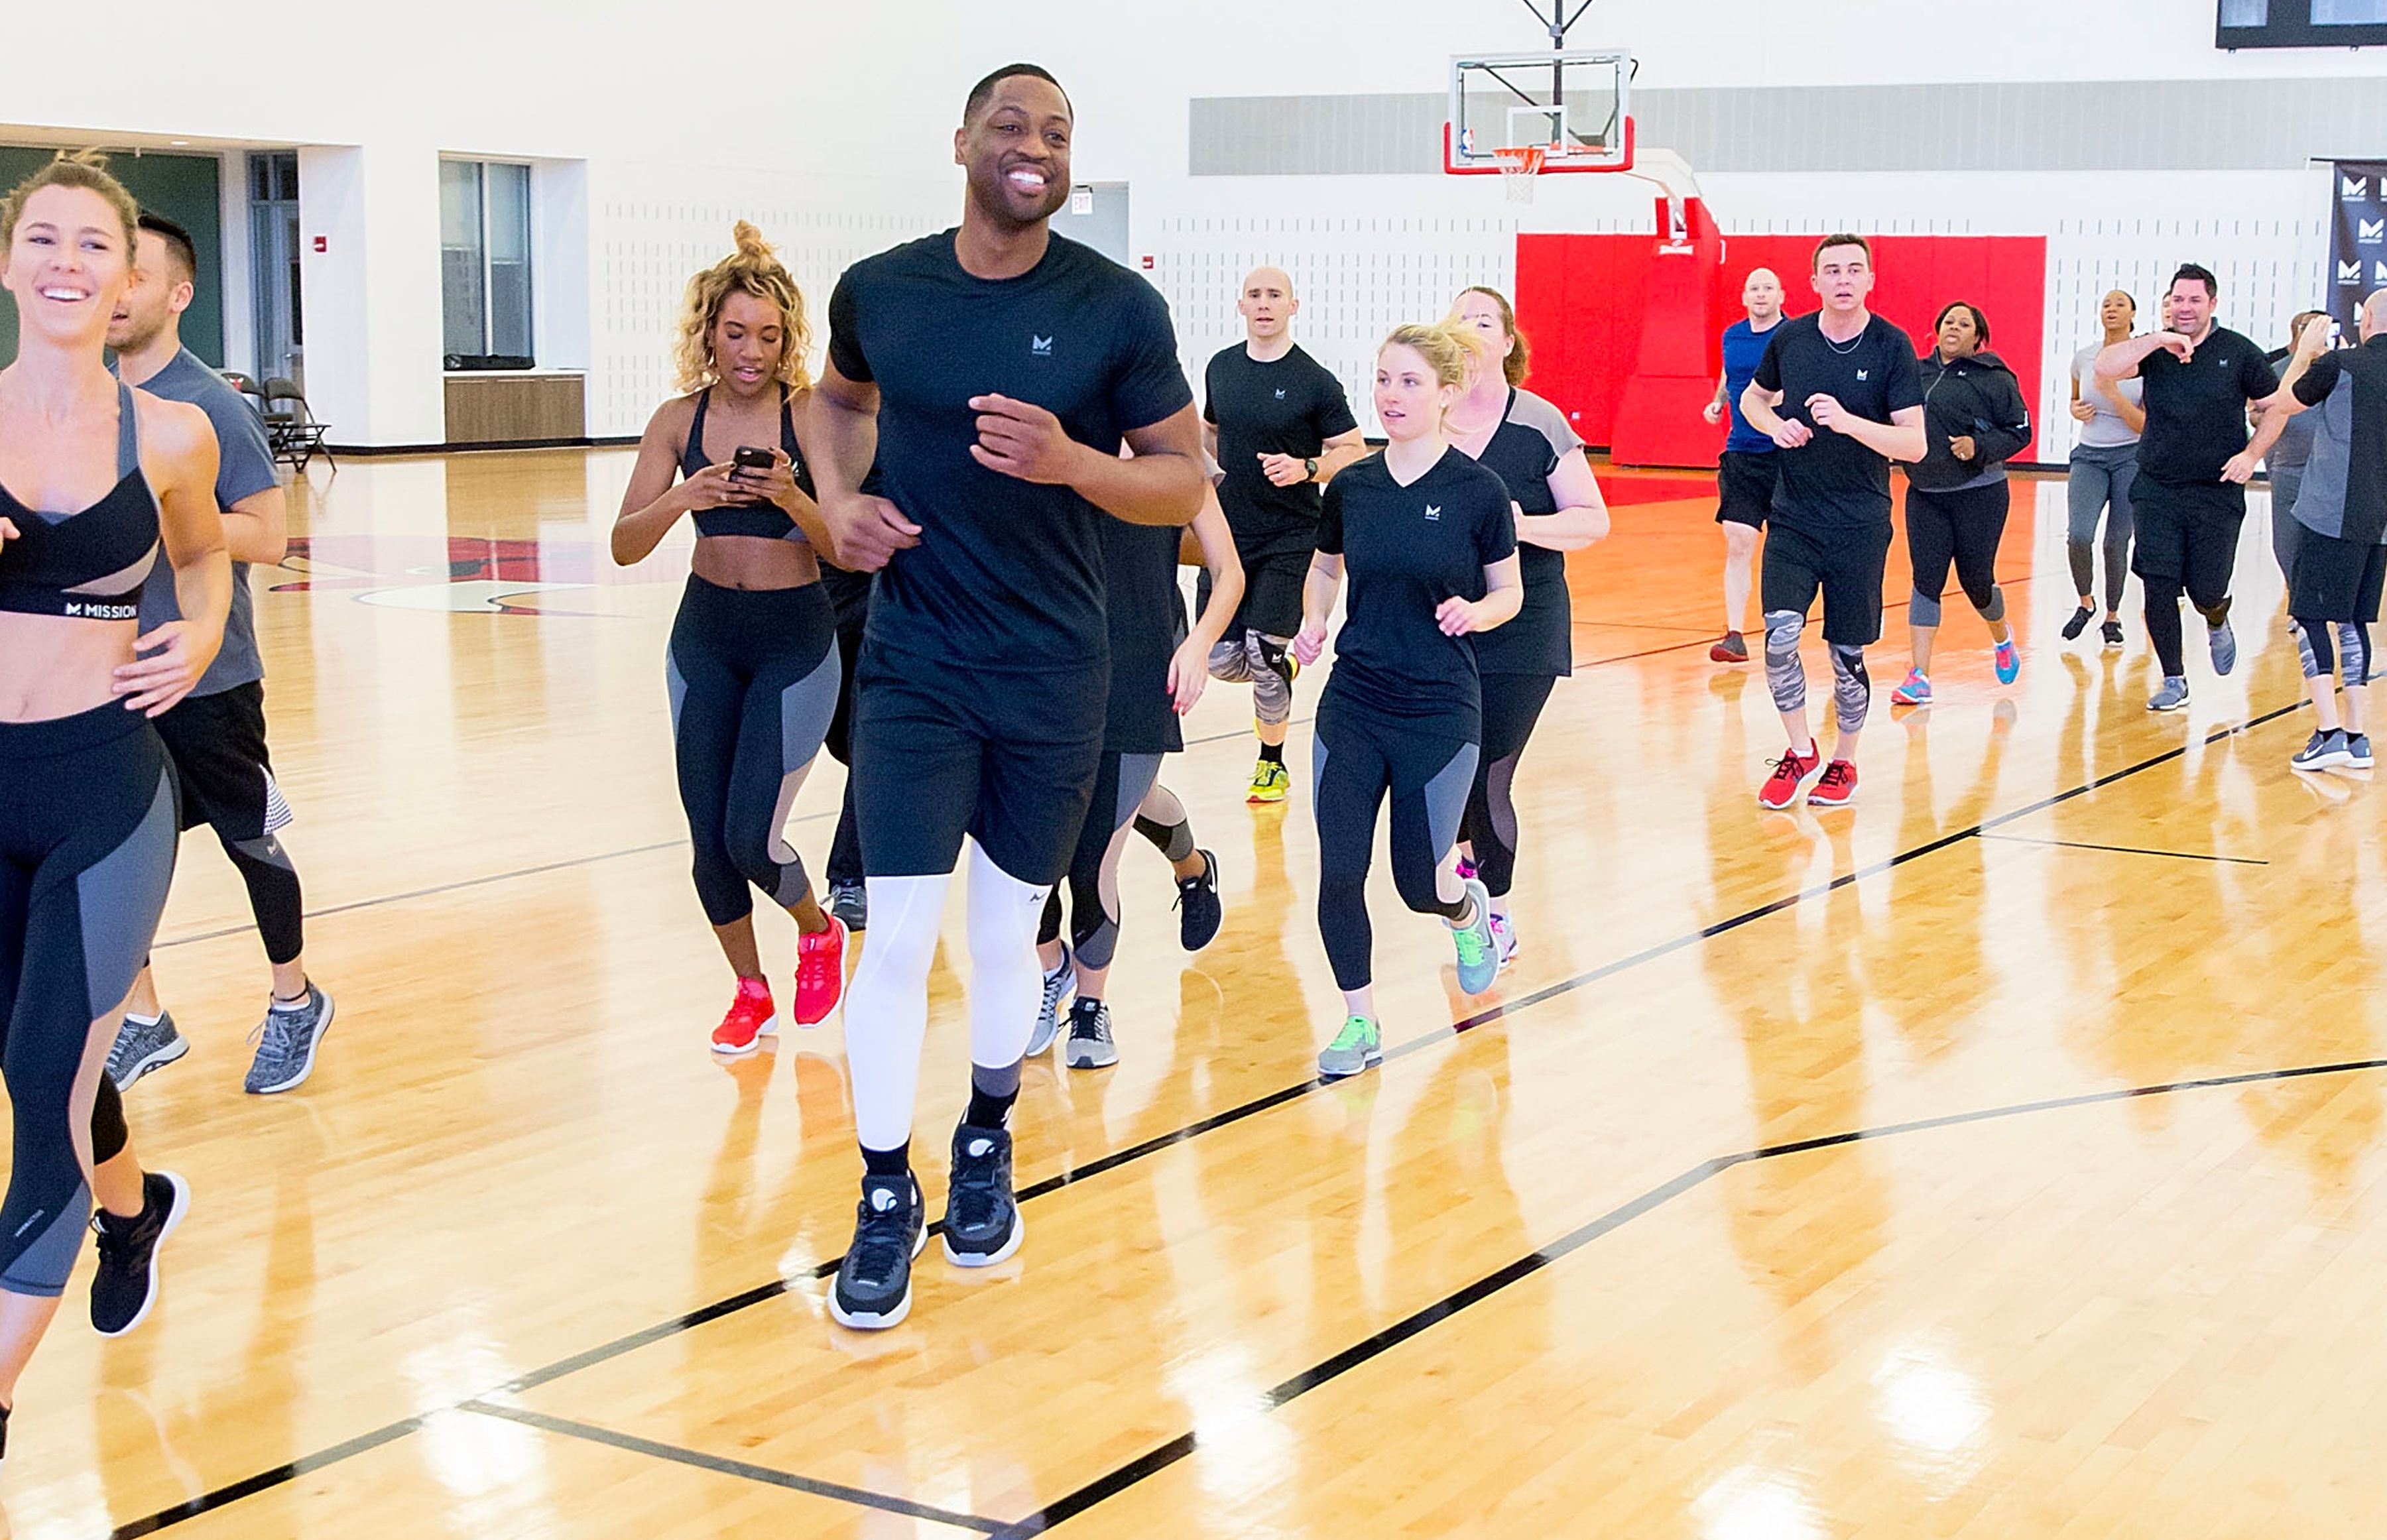 I Worked Out With Dwyane Wade. Here's What Happened